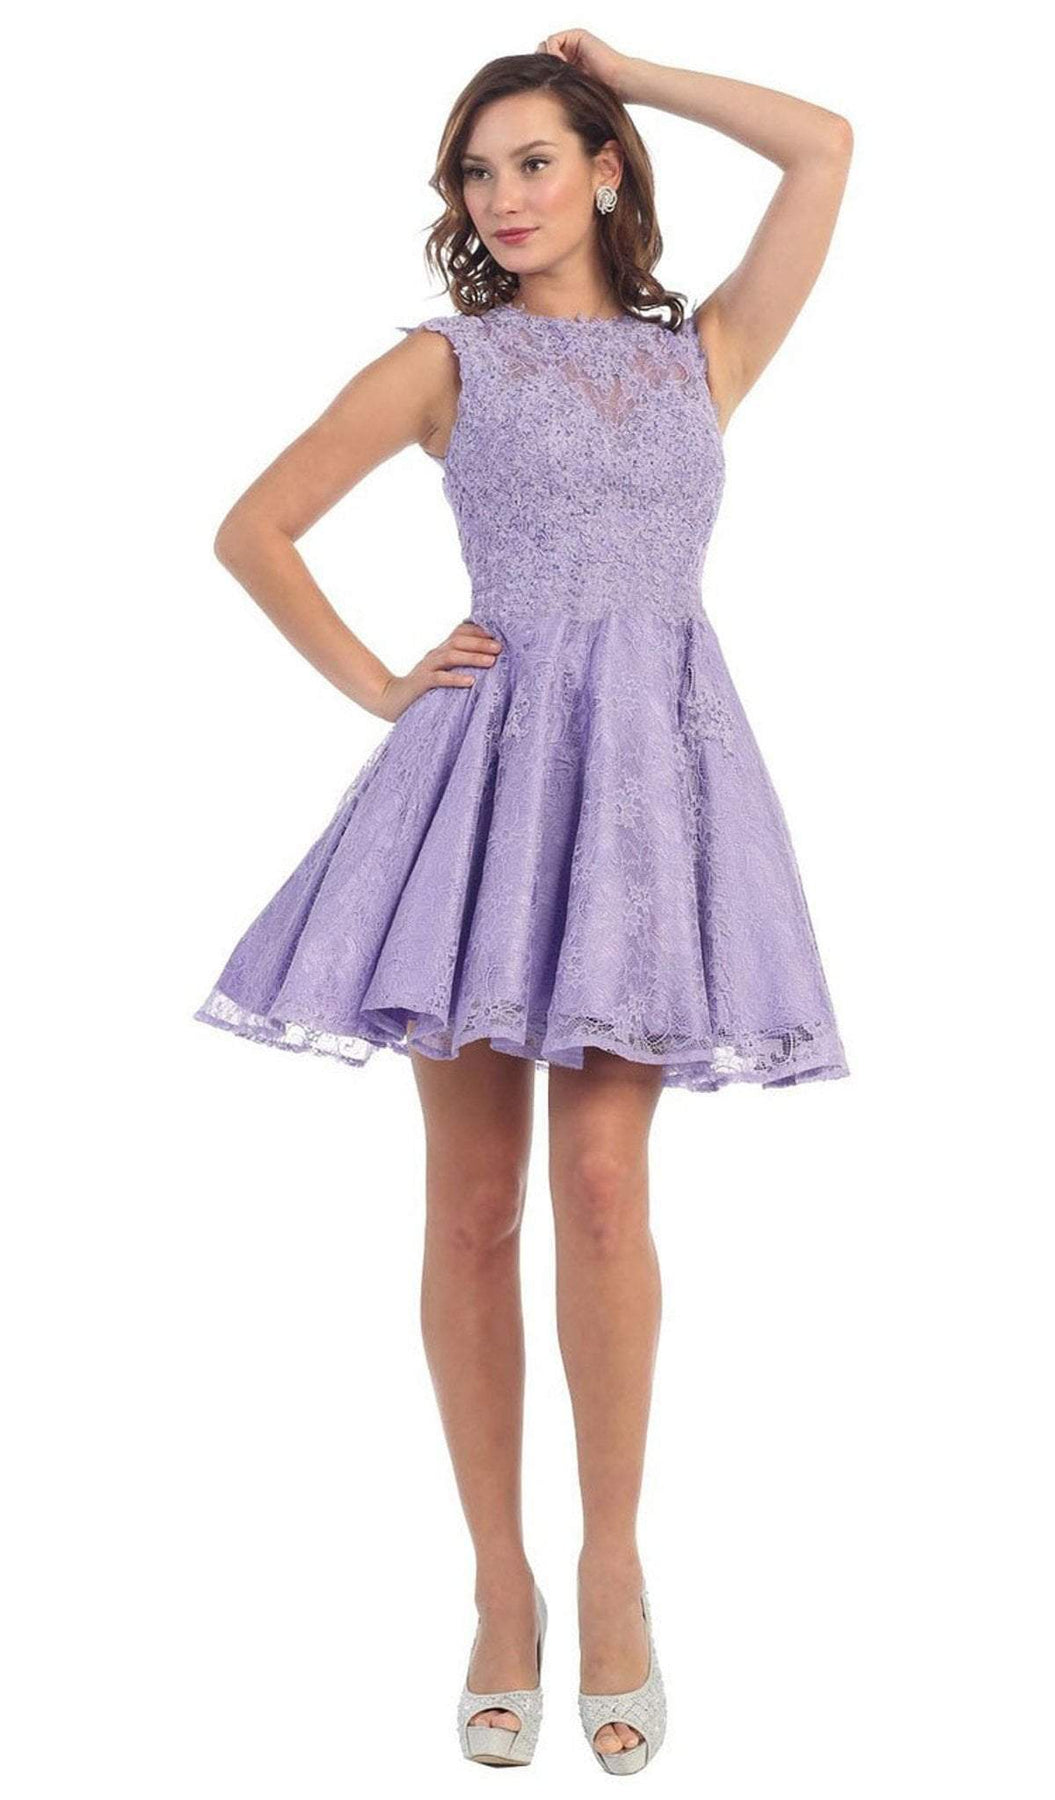 May Queen - Beaded Floral A Line Cocktail Dress Special Occasion Dress 4 / Lilac